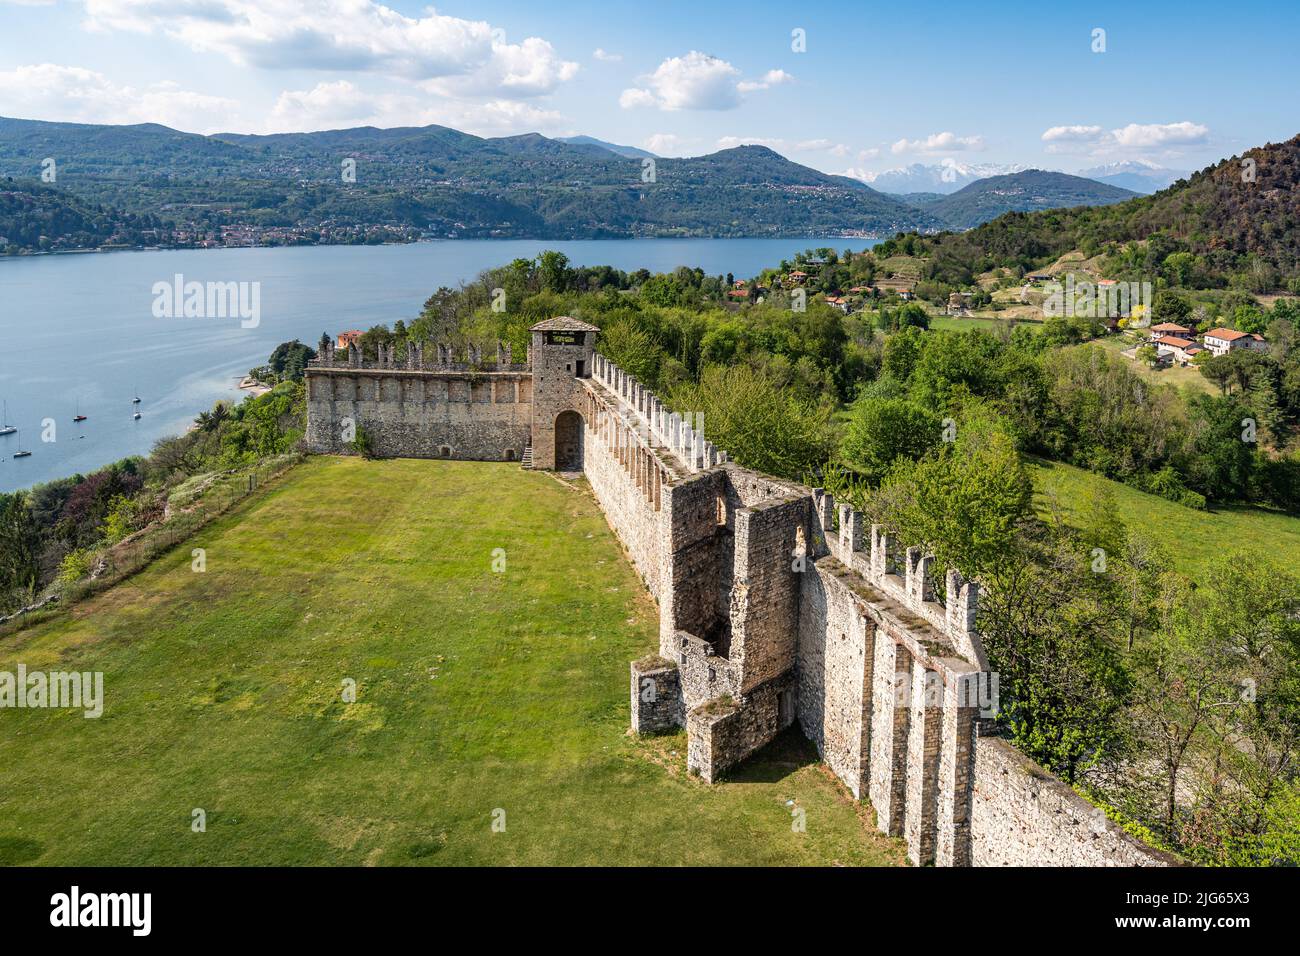 View from the Rocca di Angera with the walls of the castle and the Lake Maggiore in the background, Angera, Lombardy, Italy Stock Photo